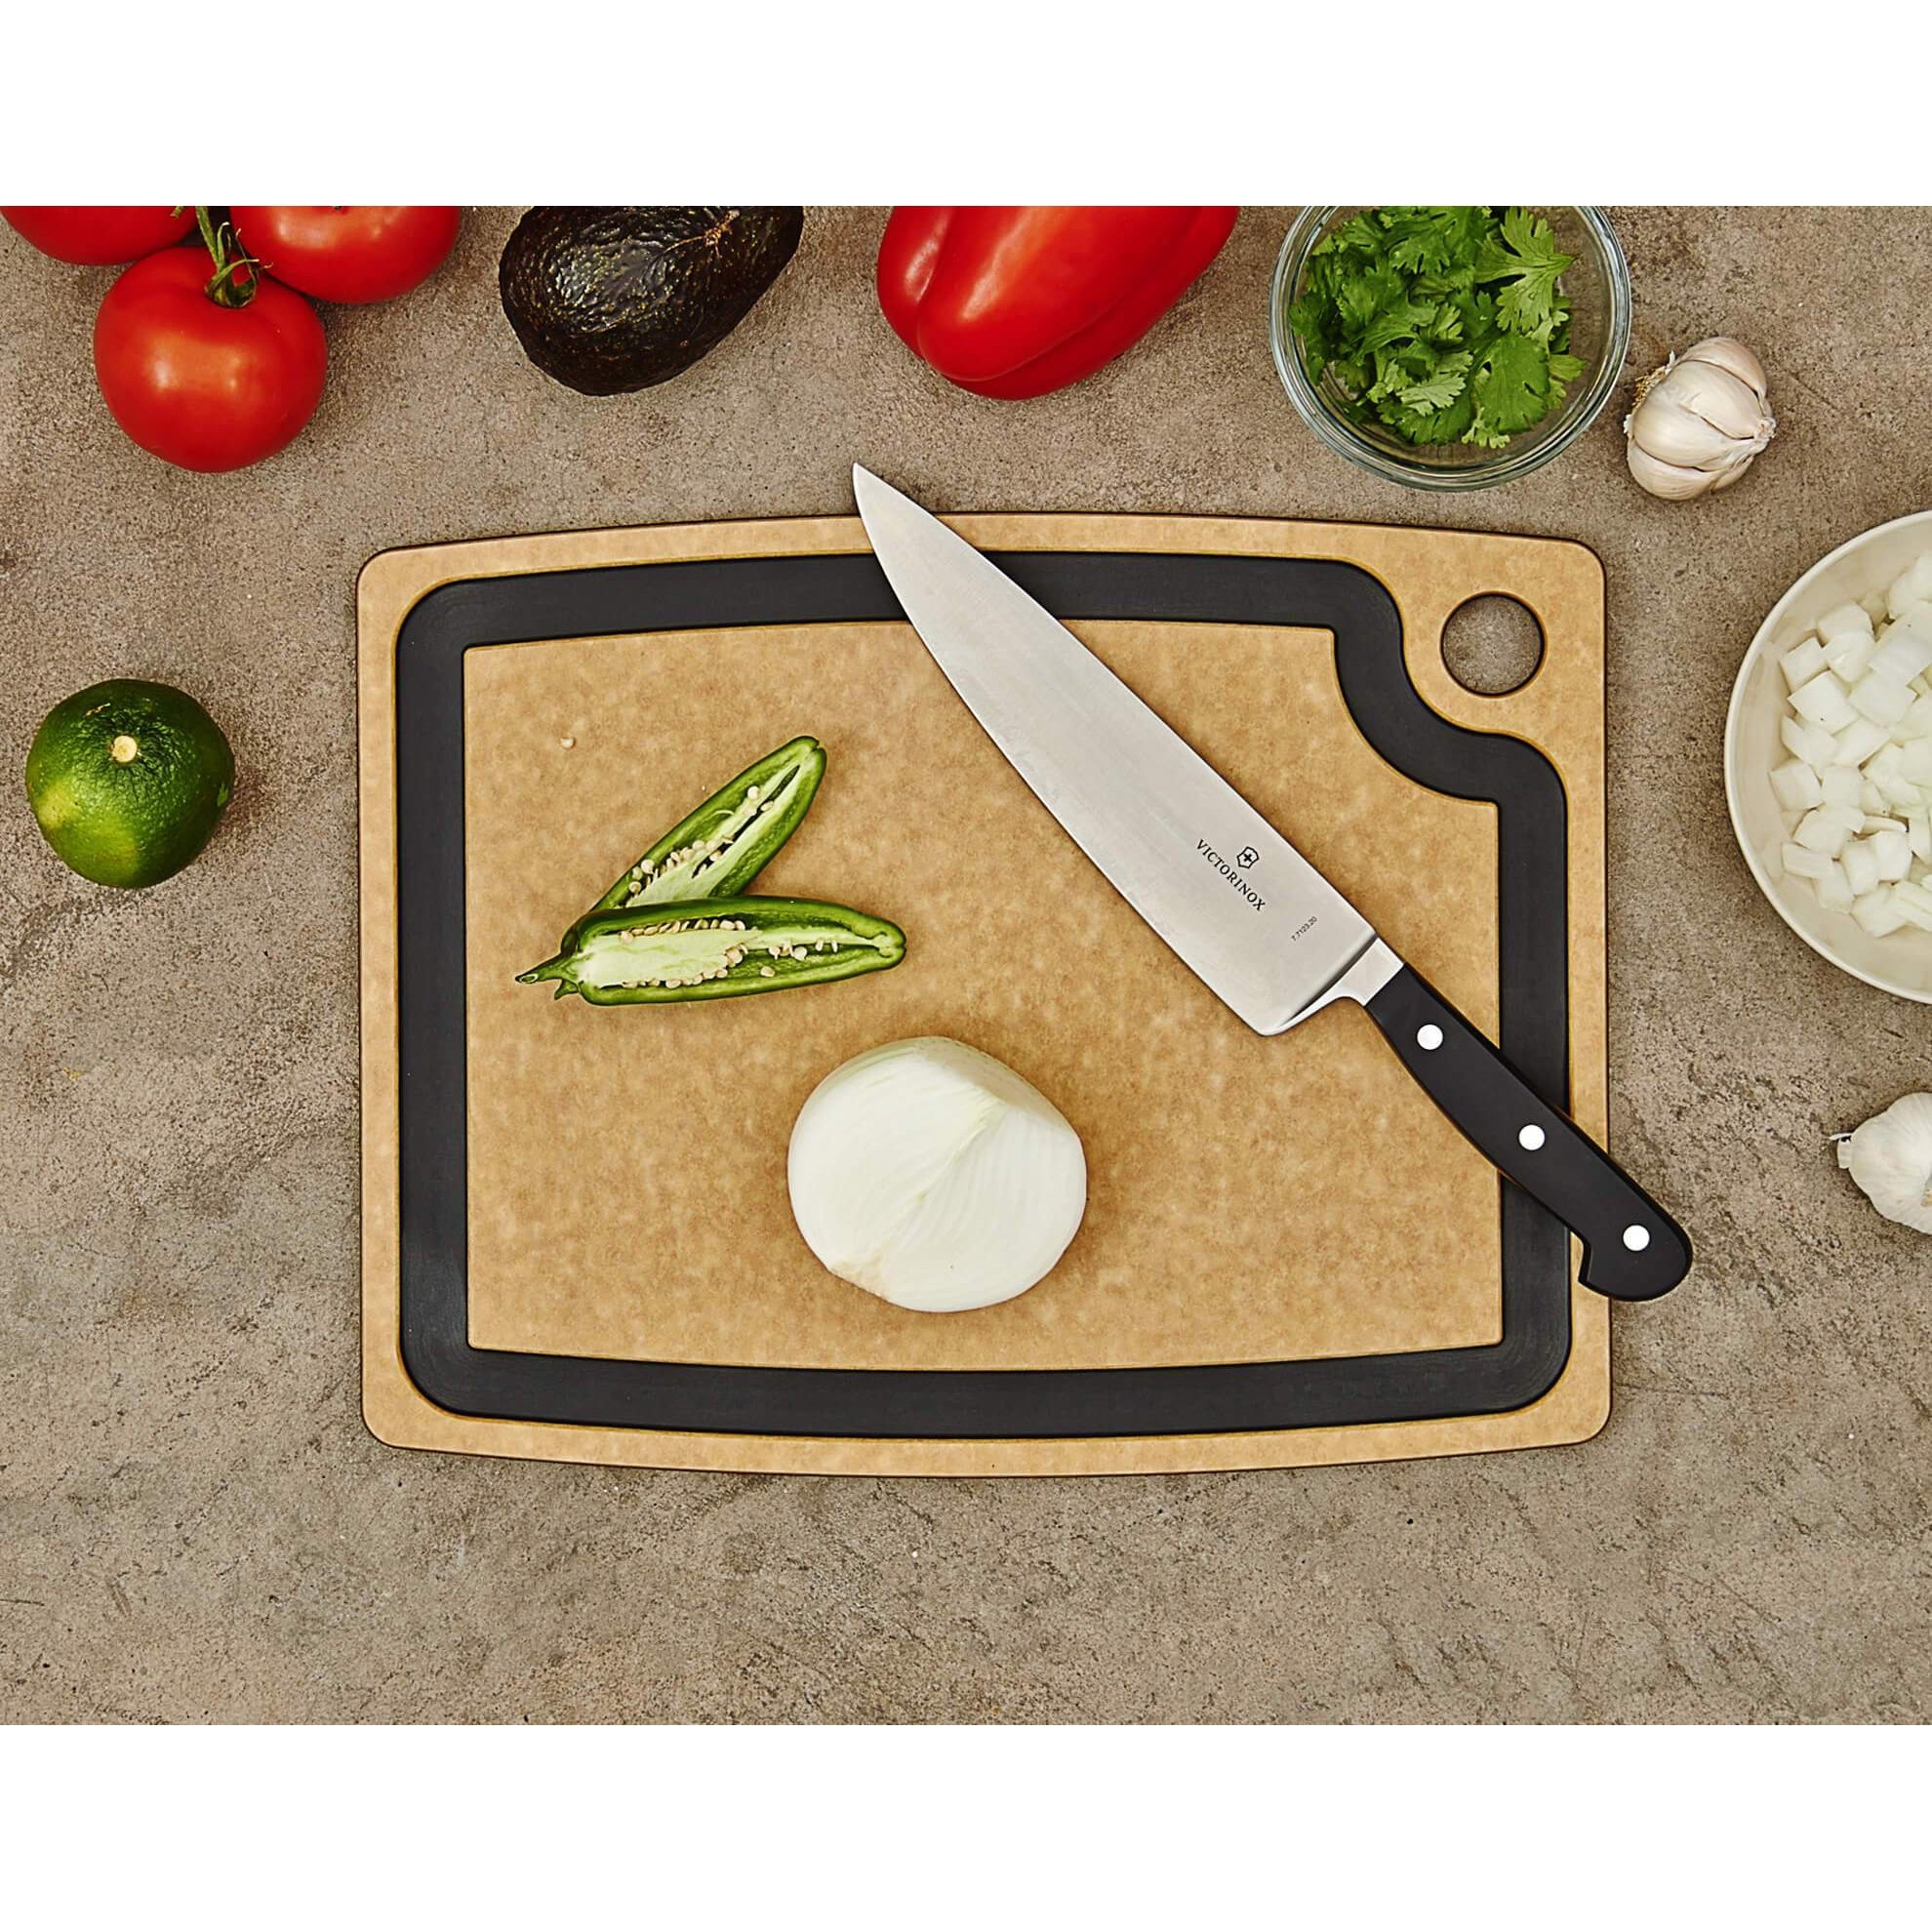 Victorinox Gourmet Series Chopping Board with Groove Natural